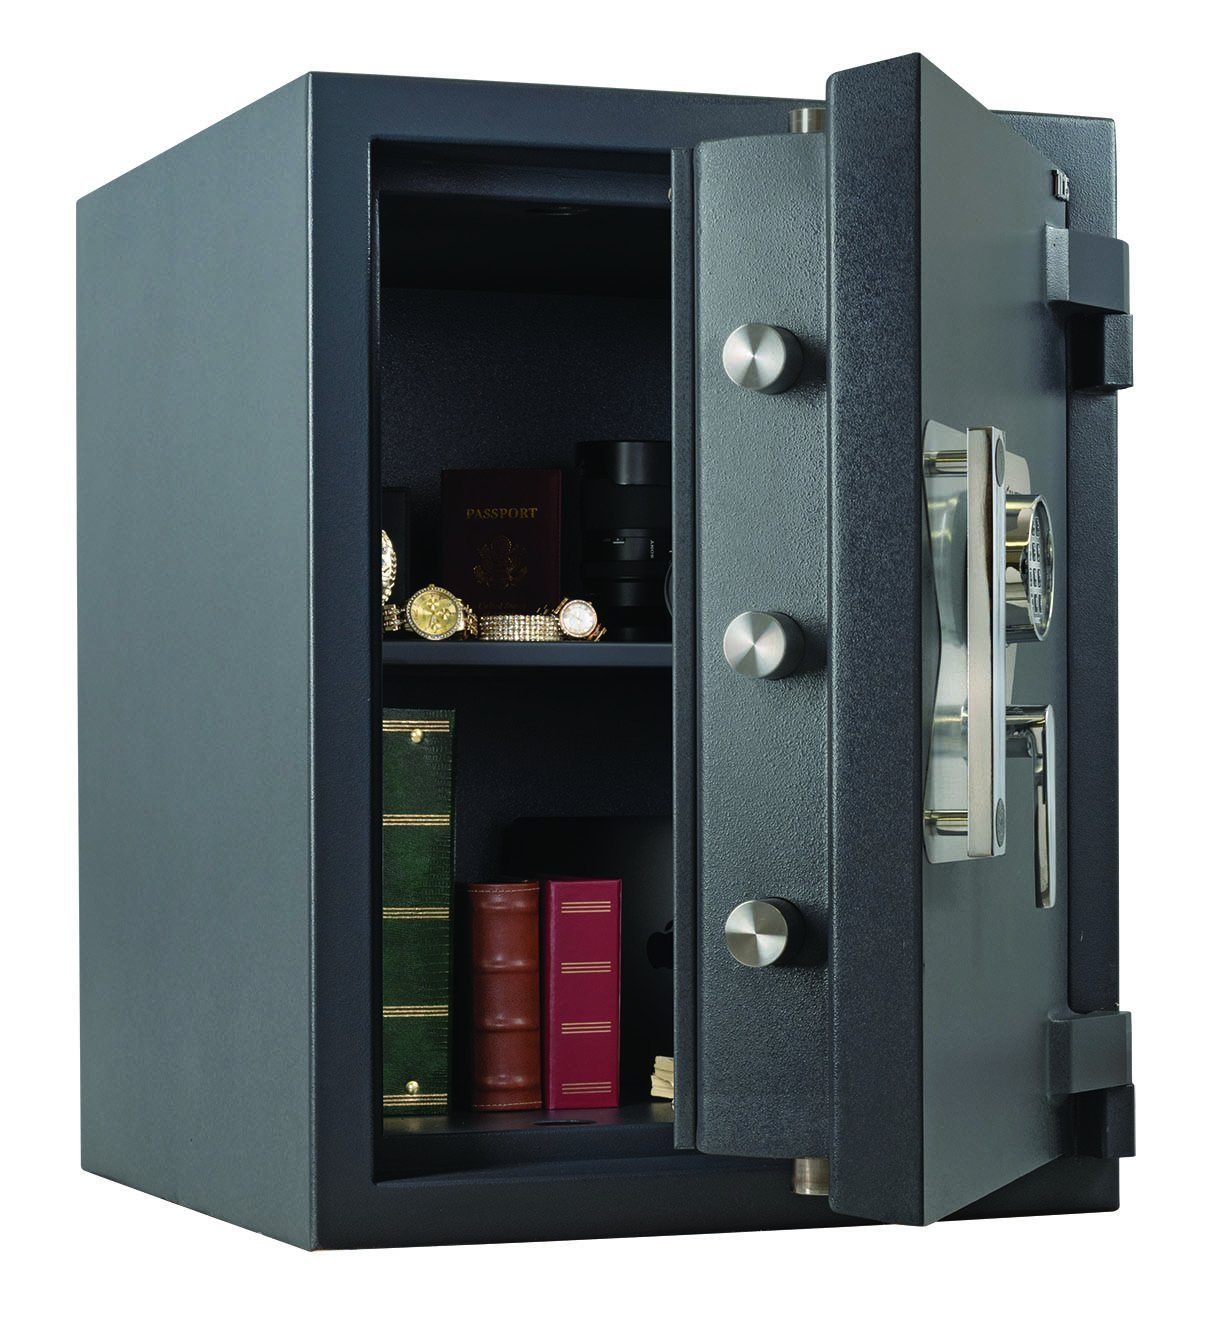 AMSEC MAX2518 High Security UL Listed TL-15 Composite Safe